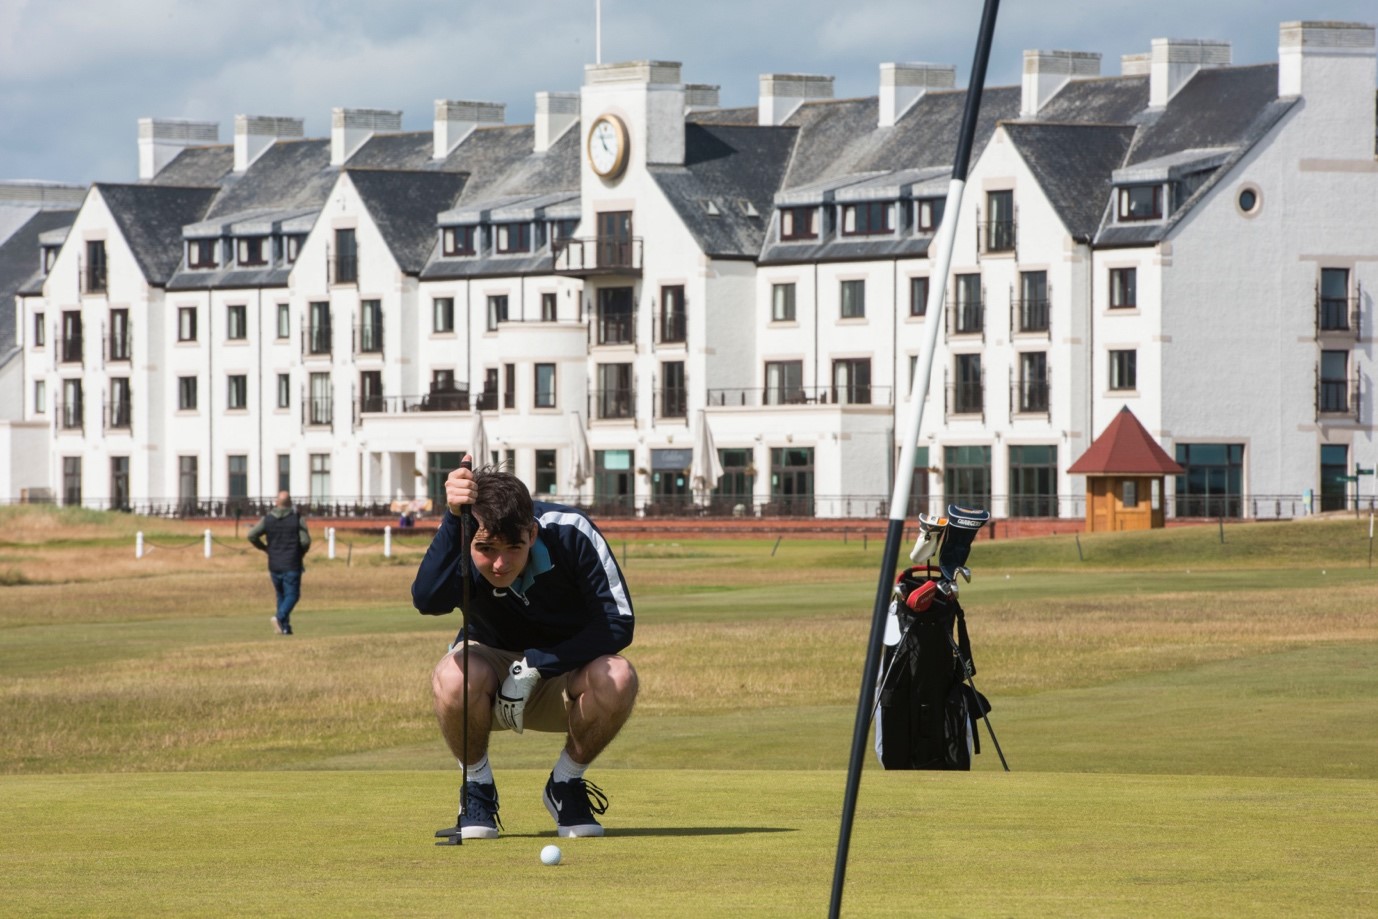 The new research partnership aims to make golf more accessible to all